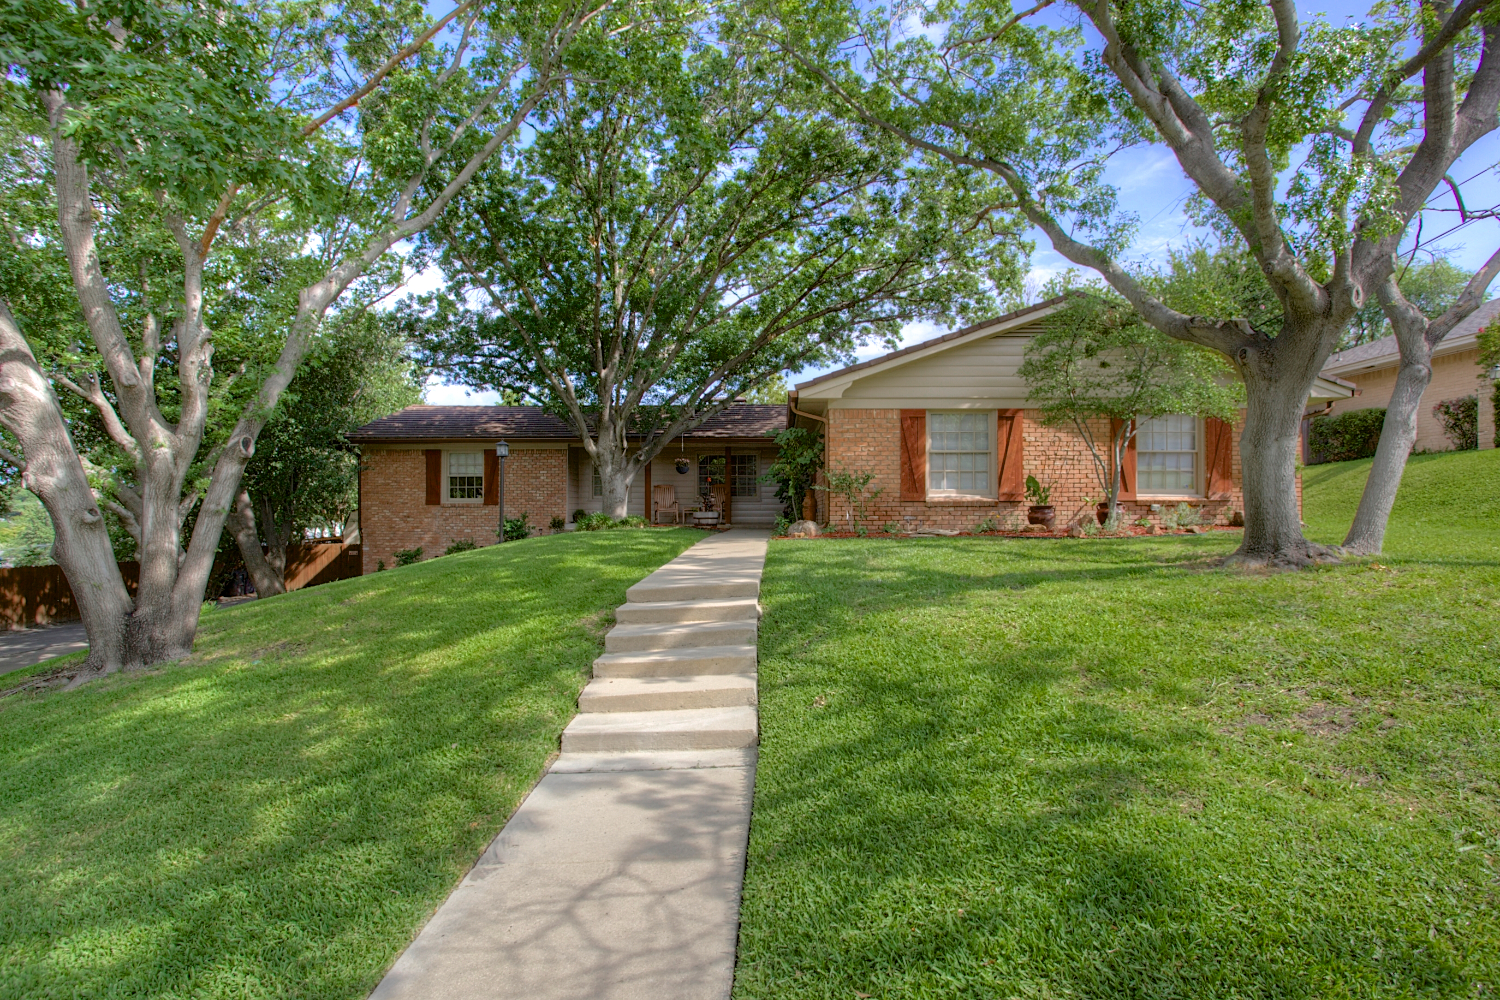 Featured image for “SOLD! – Fort Worth Ridgmar Home 76116”